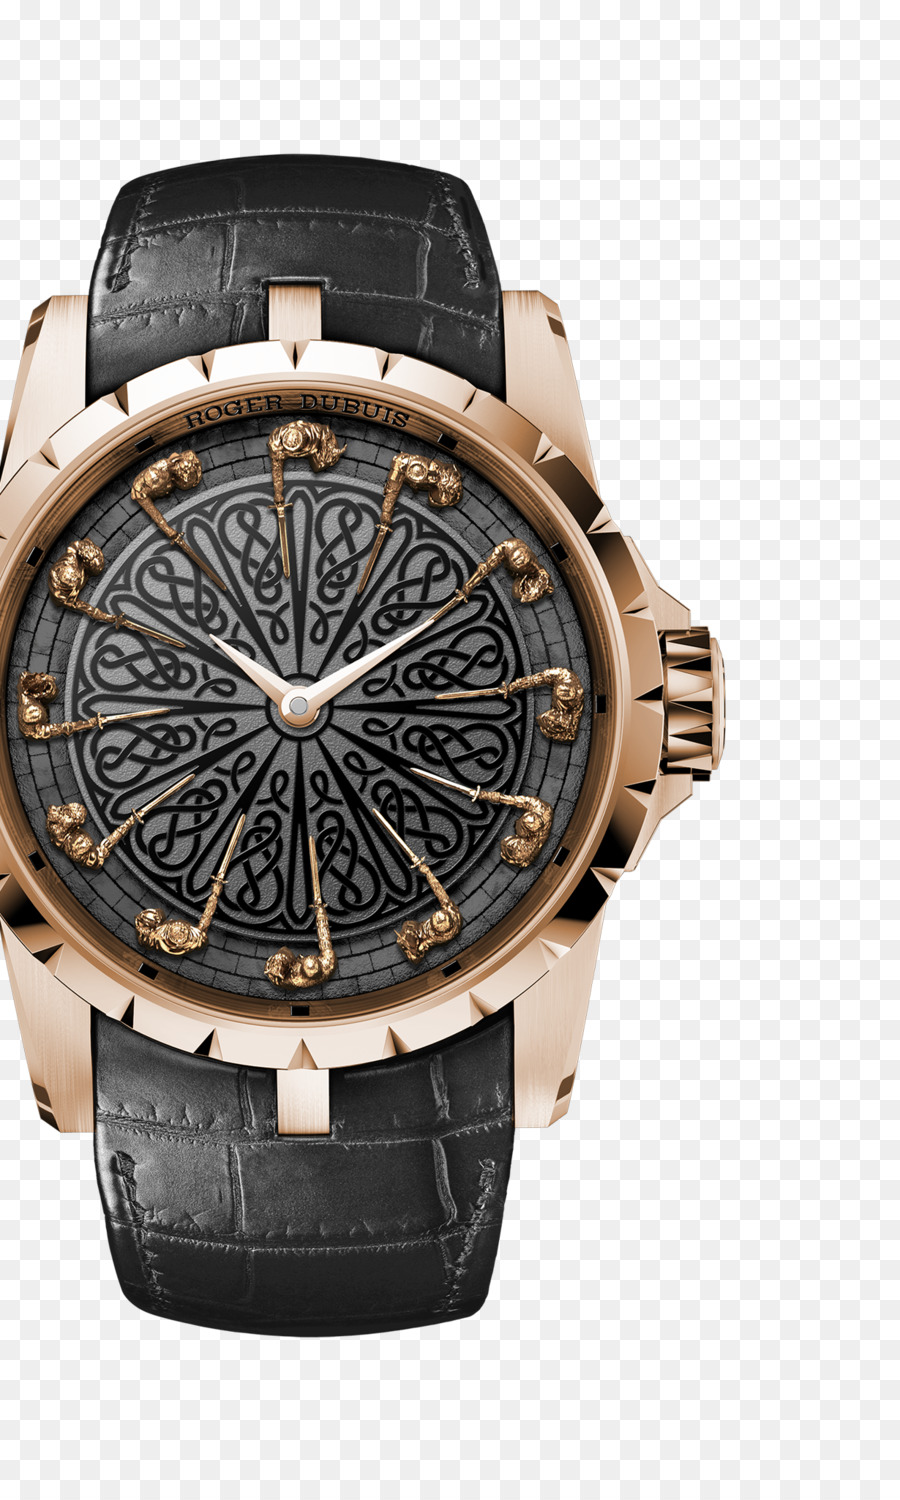 Rolex Submariner，Roger Dubuis PNG